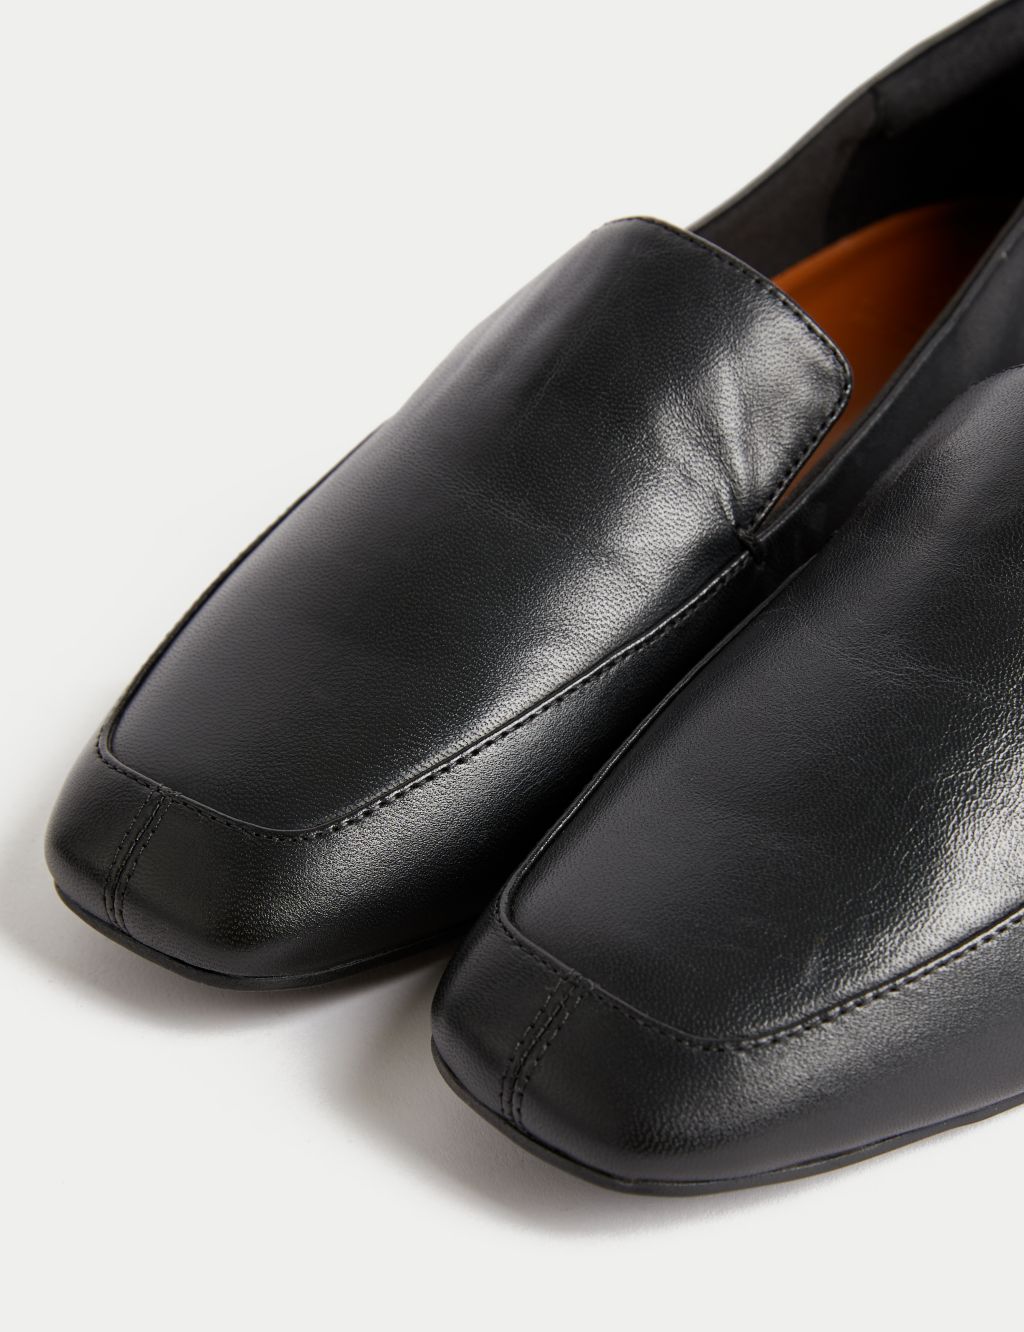 Wide Fit Leather Square Toe Flat Loafers image 3